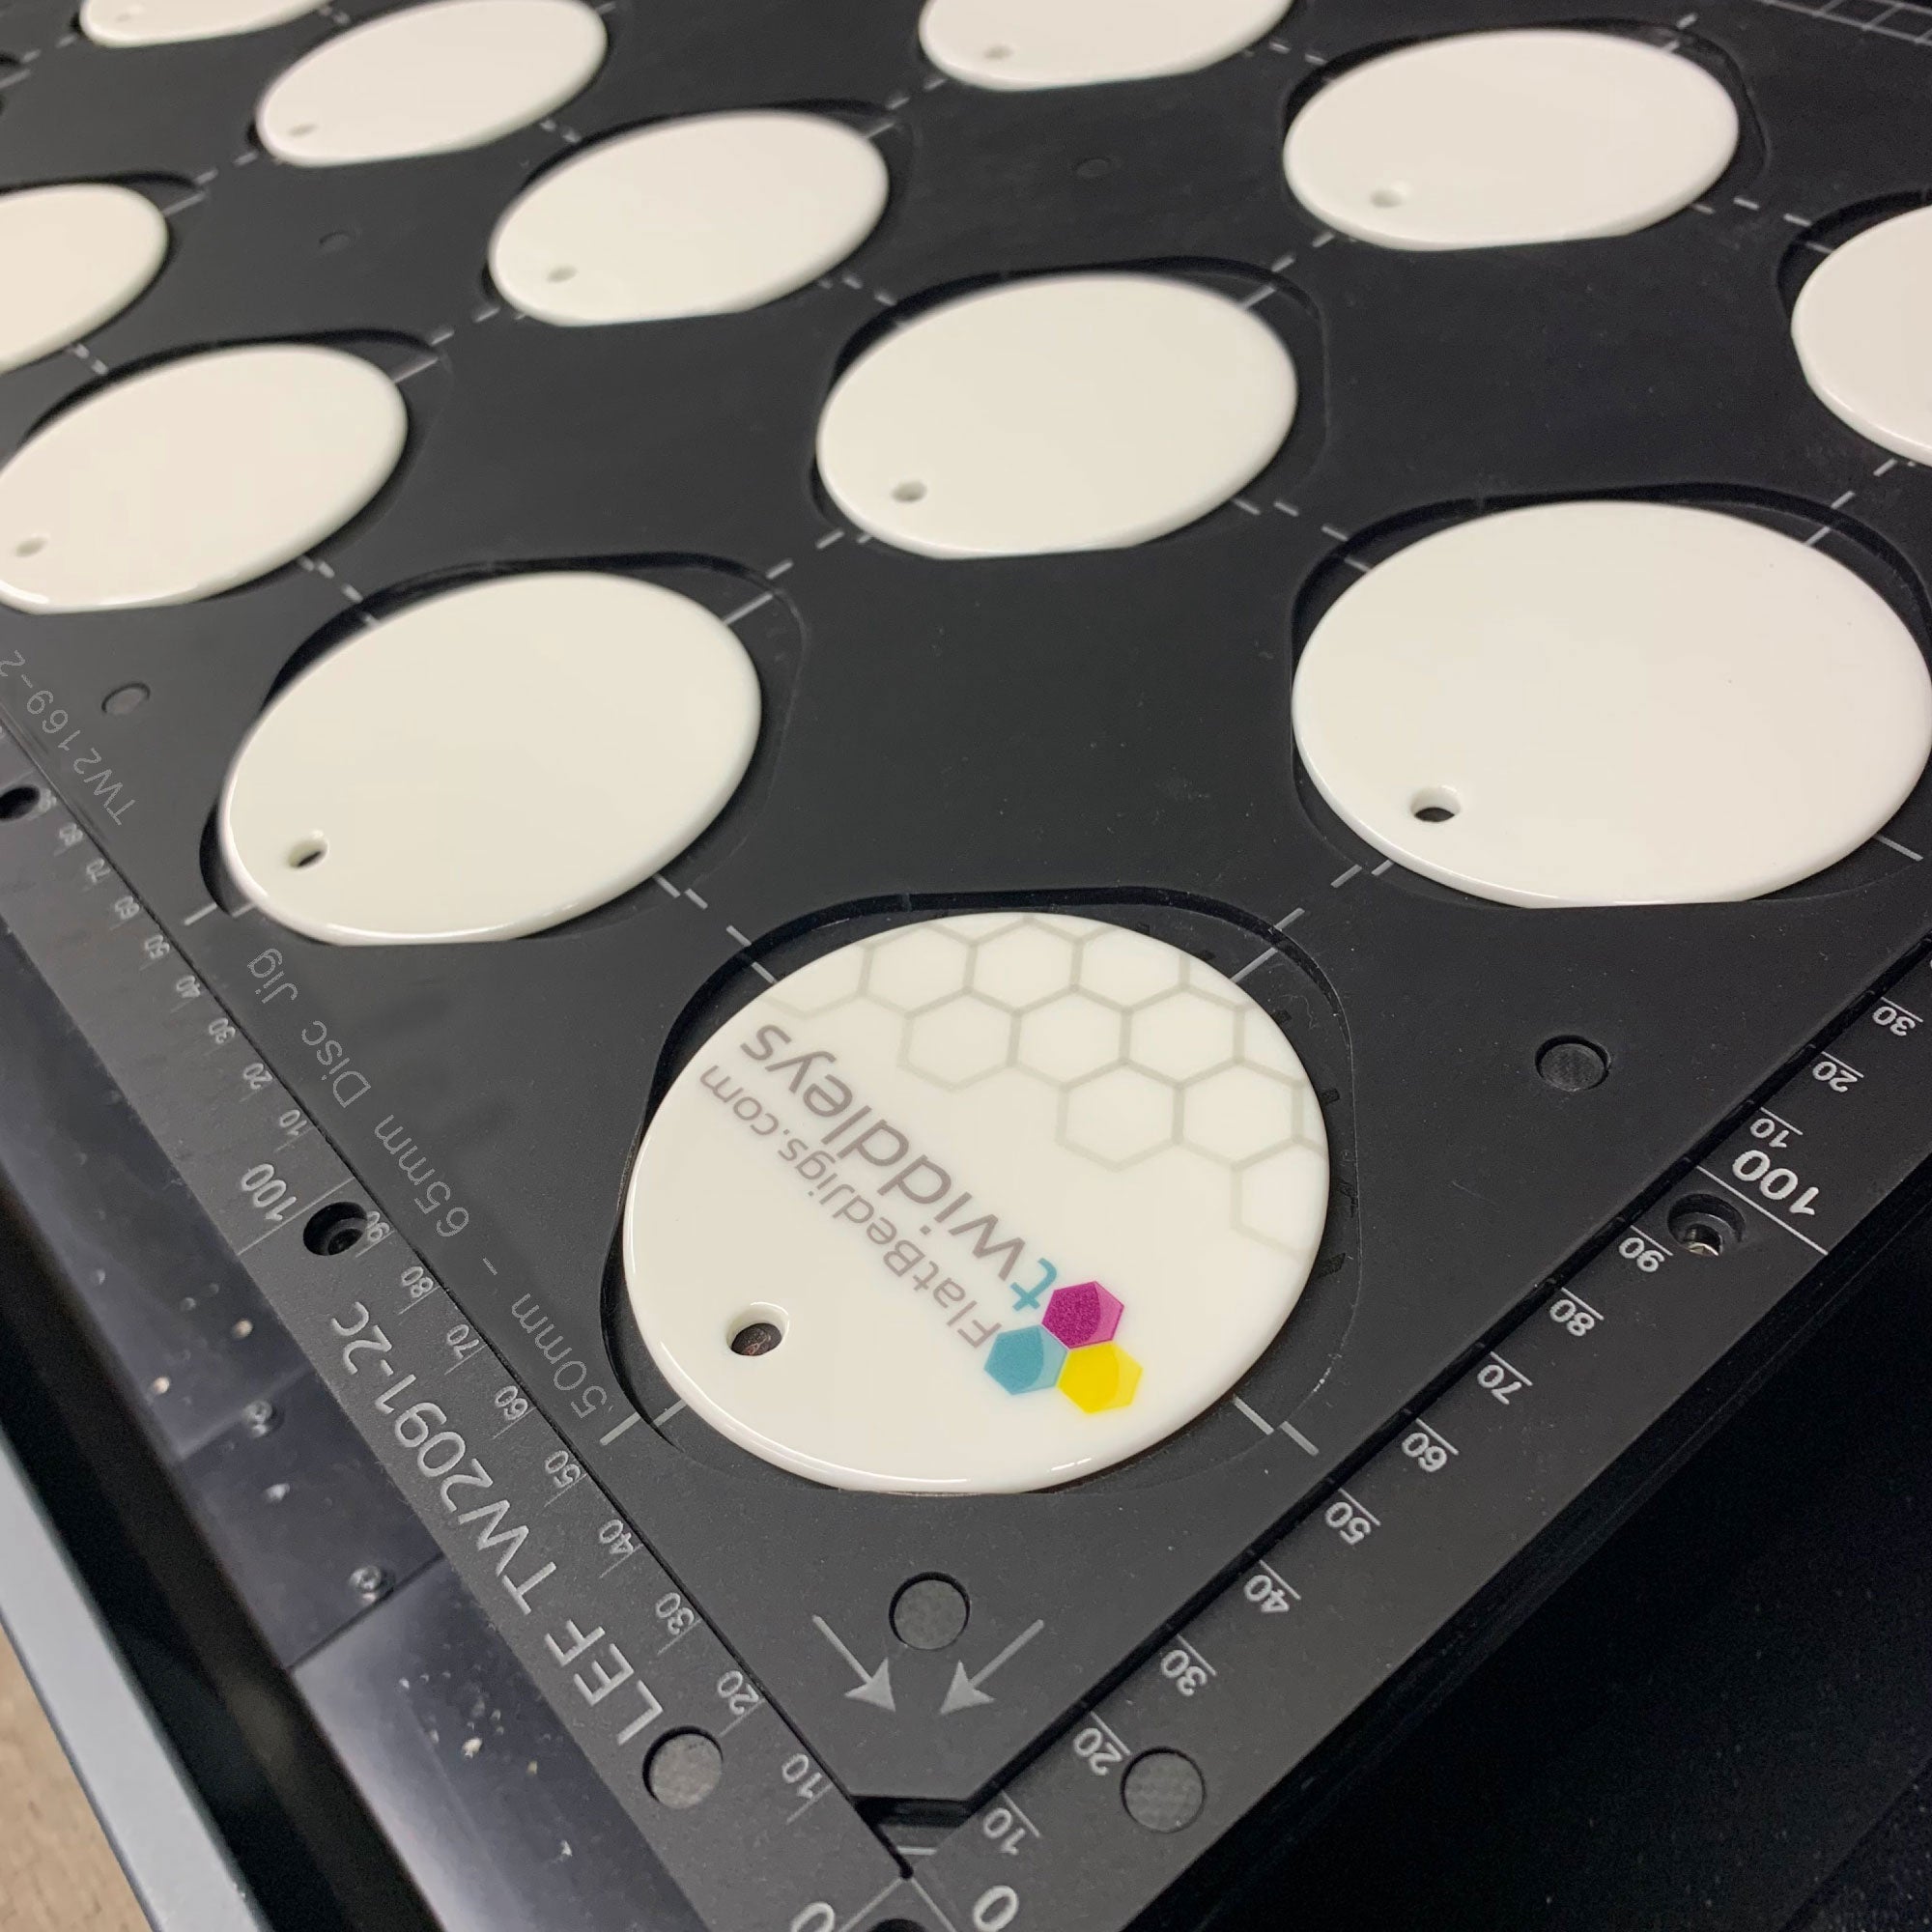 Ceramic Christmas Bauble Printing Jig for Roland MO-240 Flatbed Printer Series: 50mm - 65mm Circular Discs (TBA Spaces)